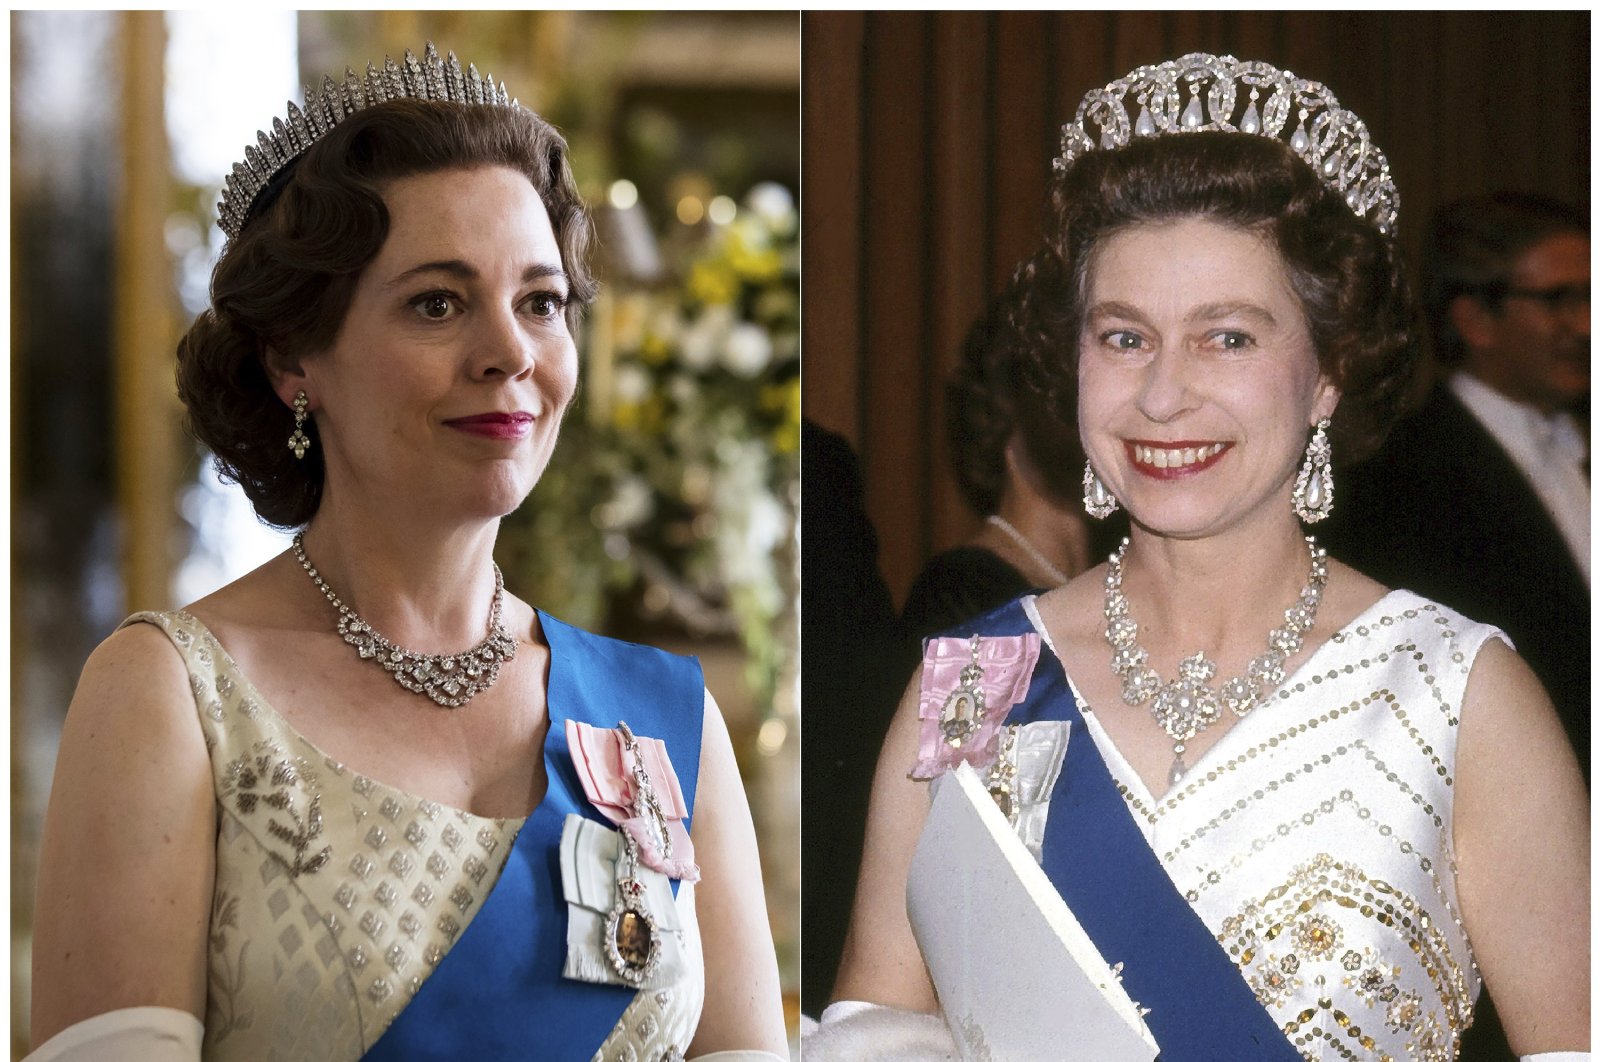 This combination of photos shows Olivia Colman portraying Queen Elizabeth II in a scene from the third season of &quot;The Crown,&quot; (L), and Queen Elizabeth II at the Sydney Opera House in Sydney, Australia on Oct. 20, 1973. (AP Photo)